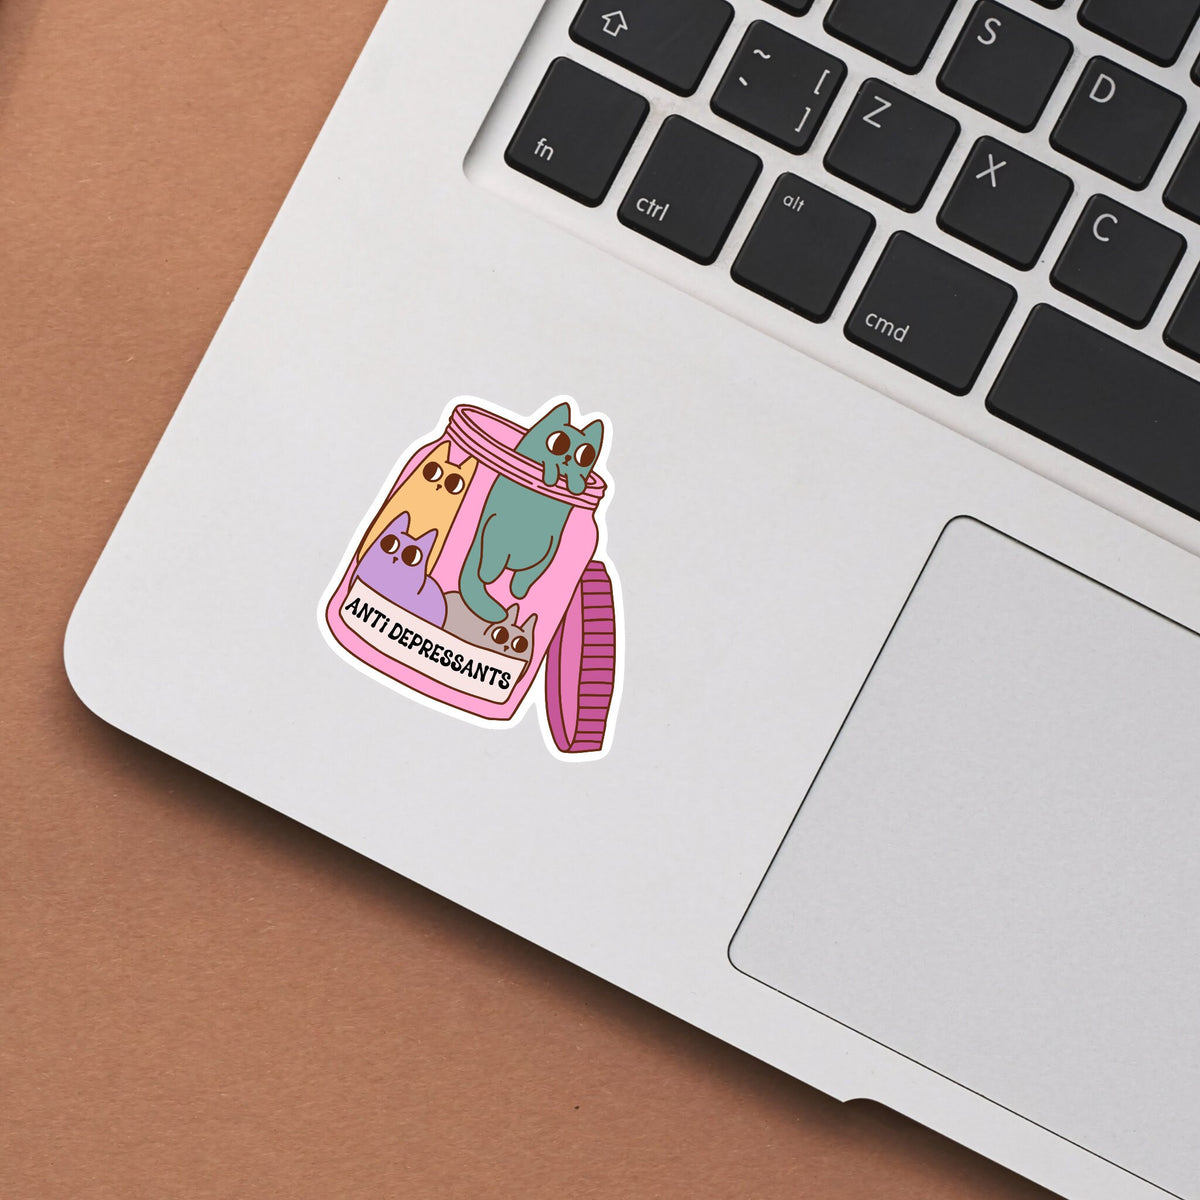 Cat Stickers, Kindle Stickers, Cute Stickers, Aesthetic Stickers, Laptop Decals, Reading Stickers